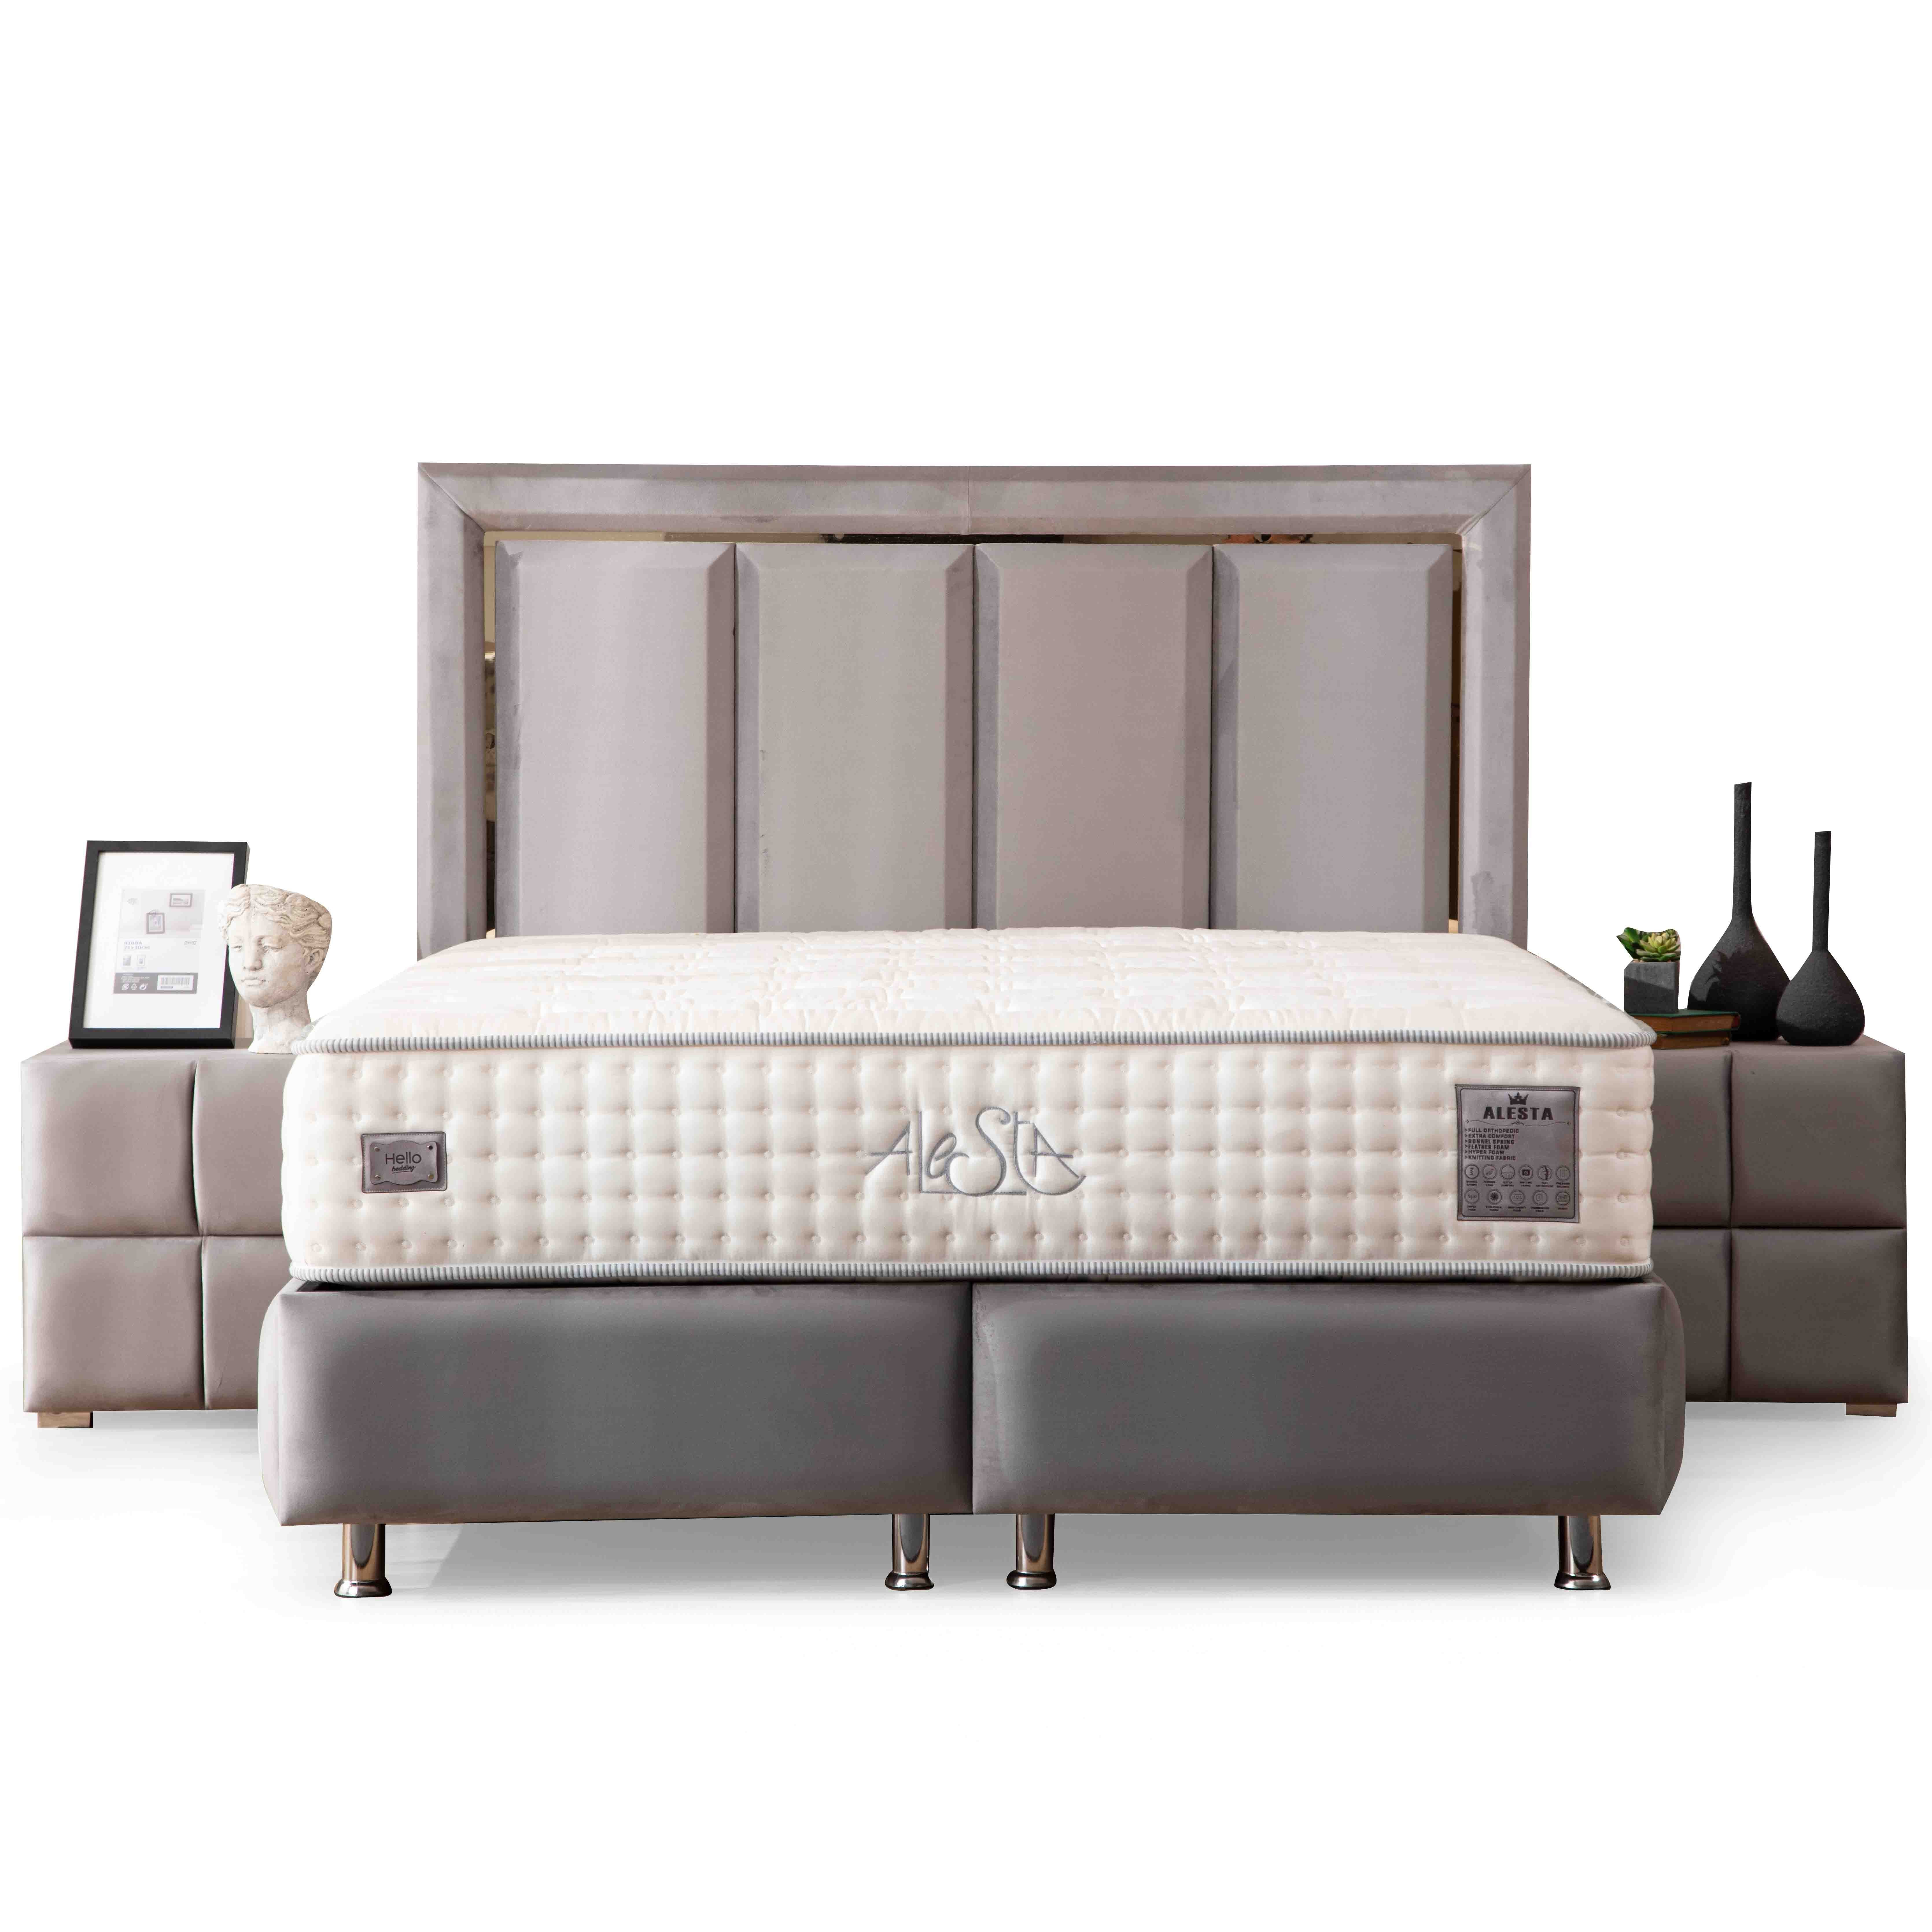 Bergama Bed With Storage 140*190